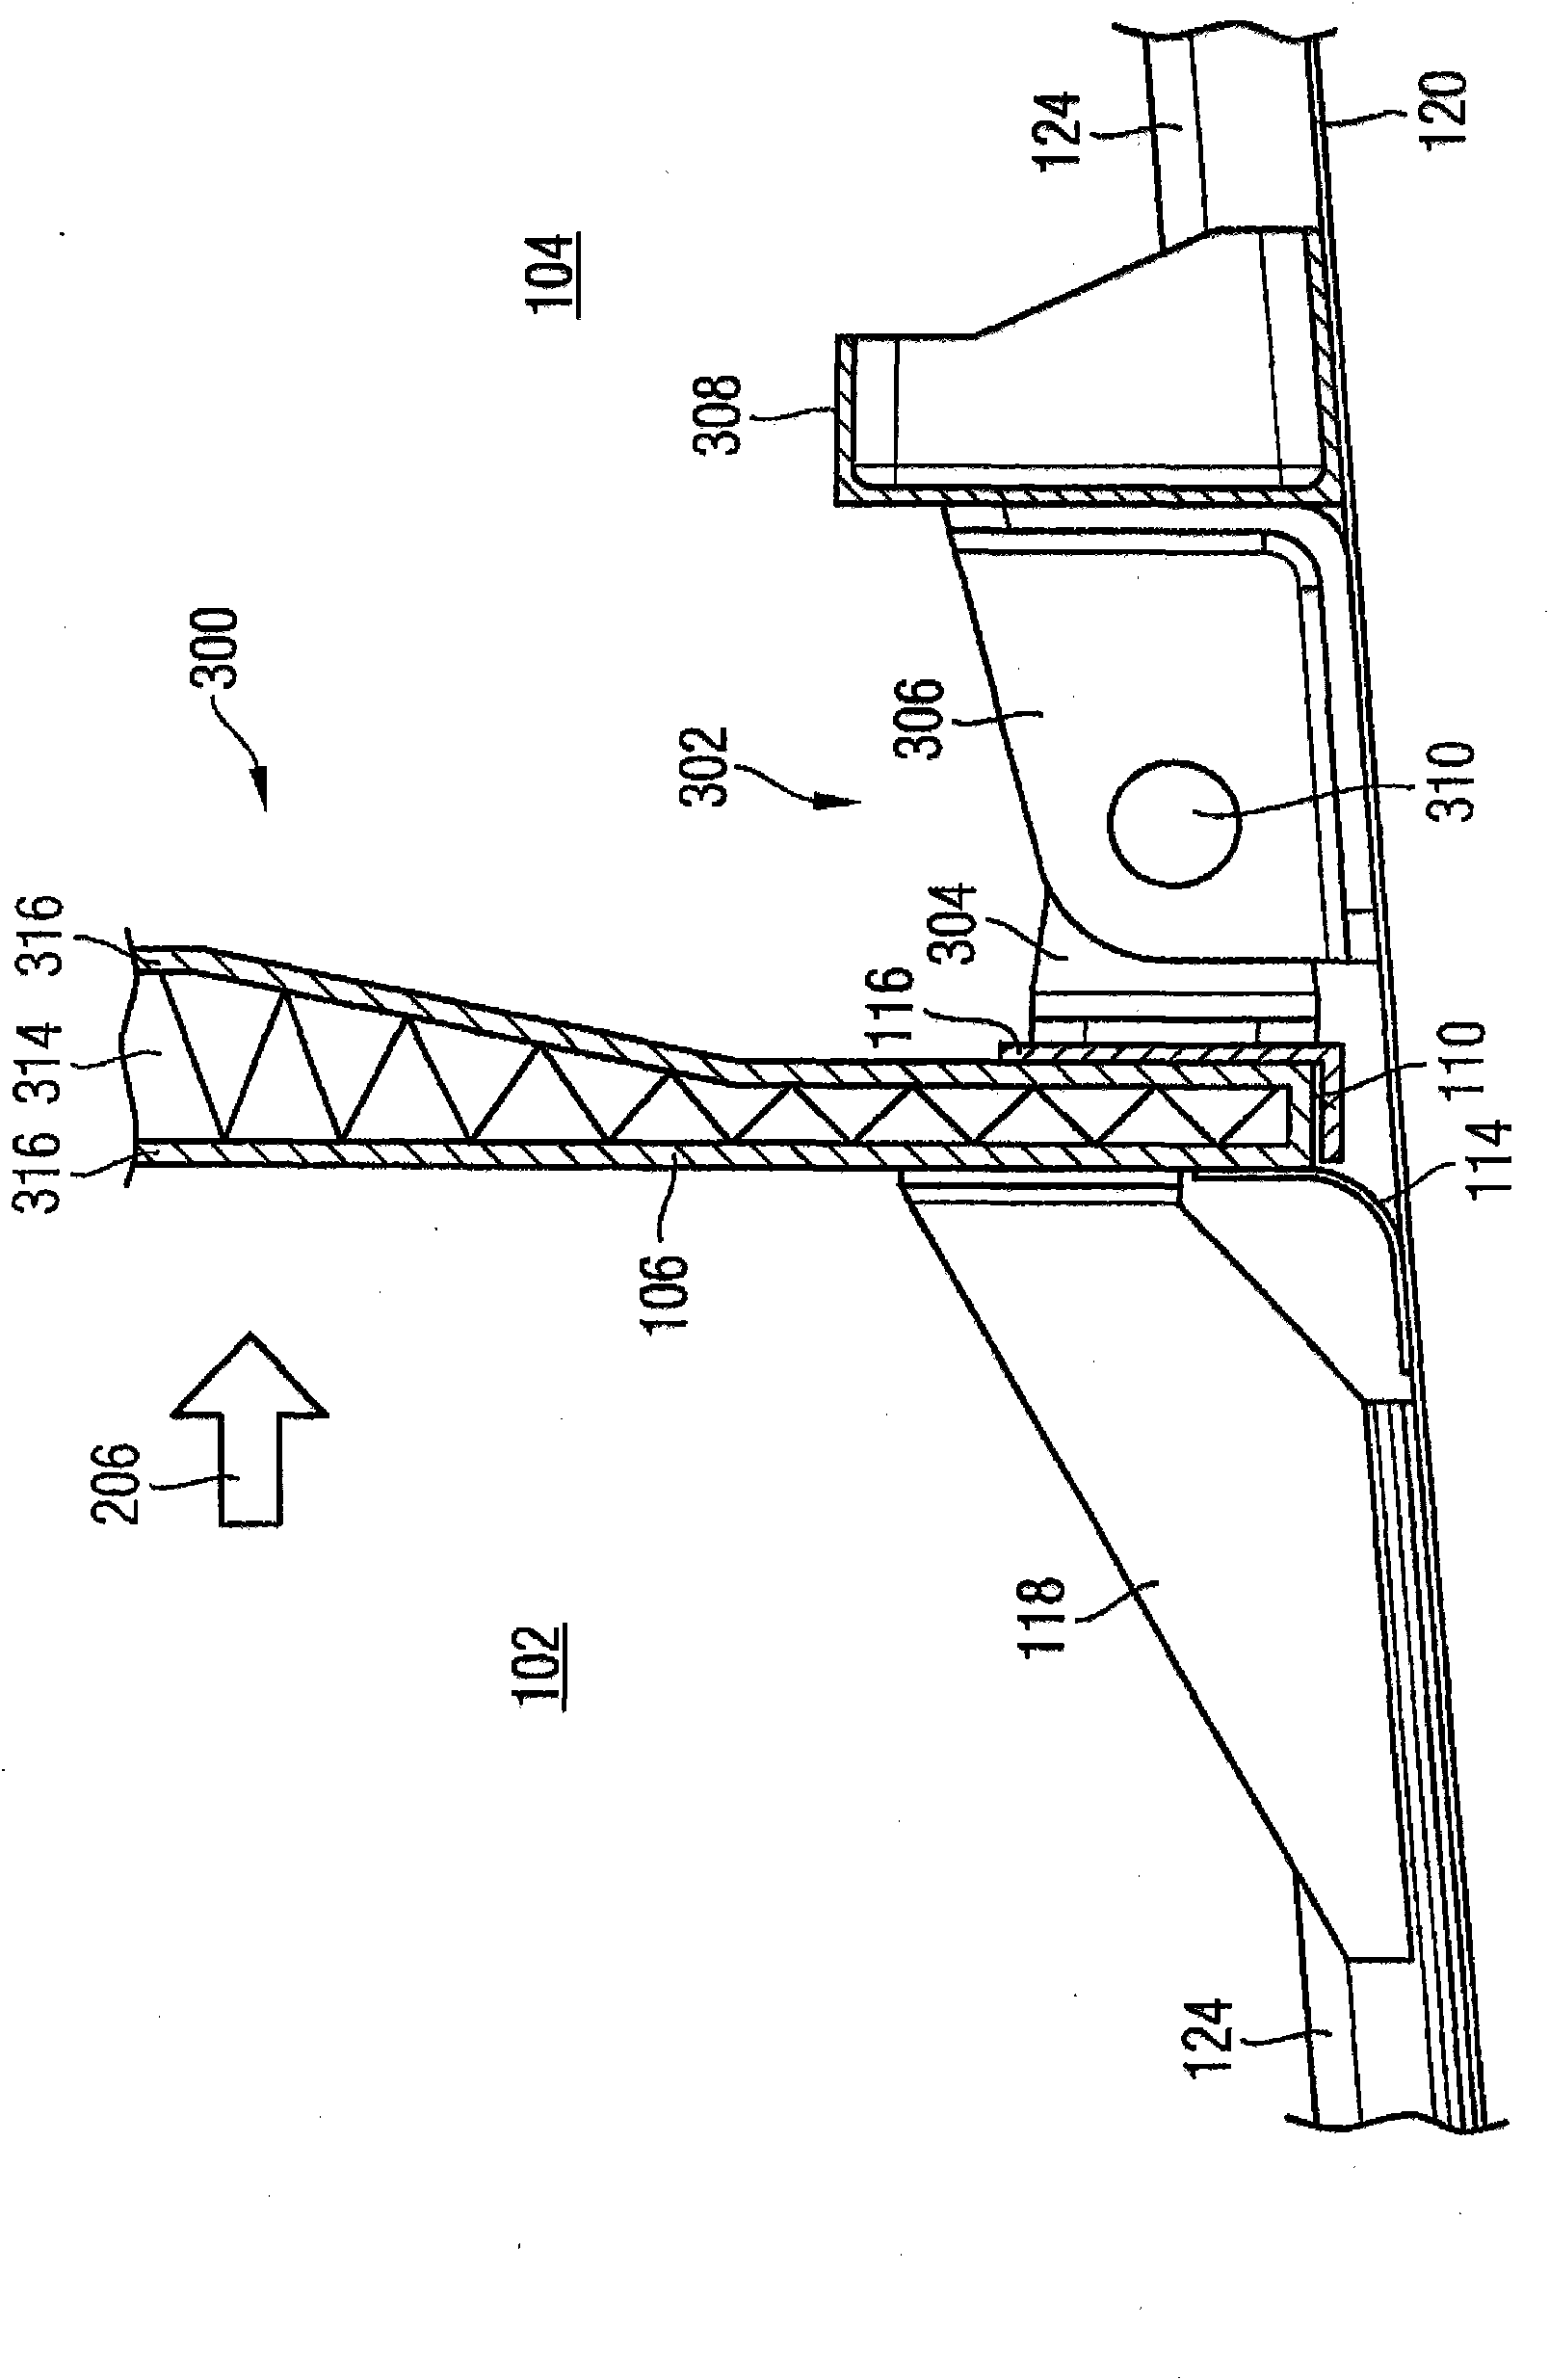 Pressure bulkhead and method for subdivision of an aircraft or spacecraft